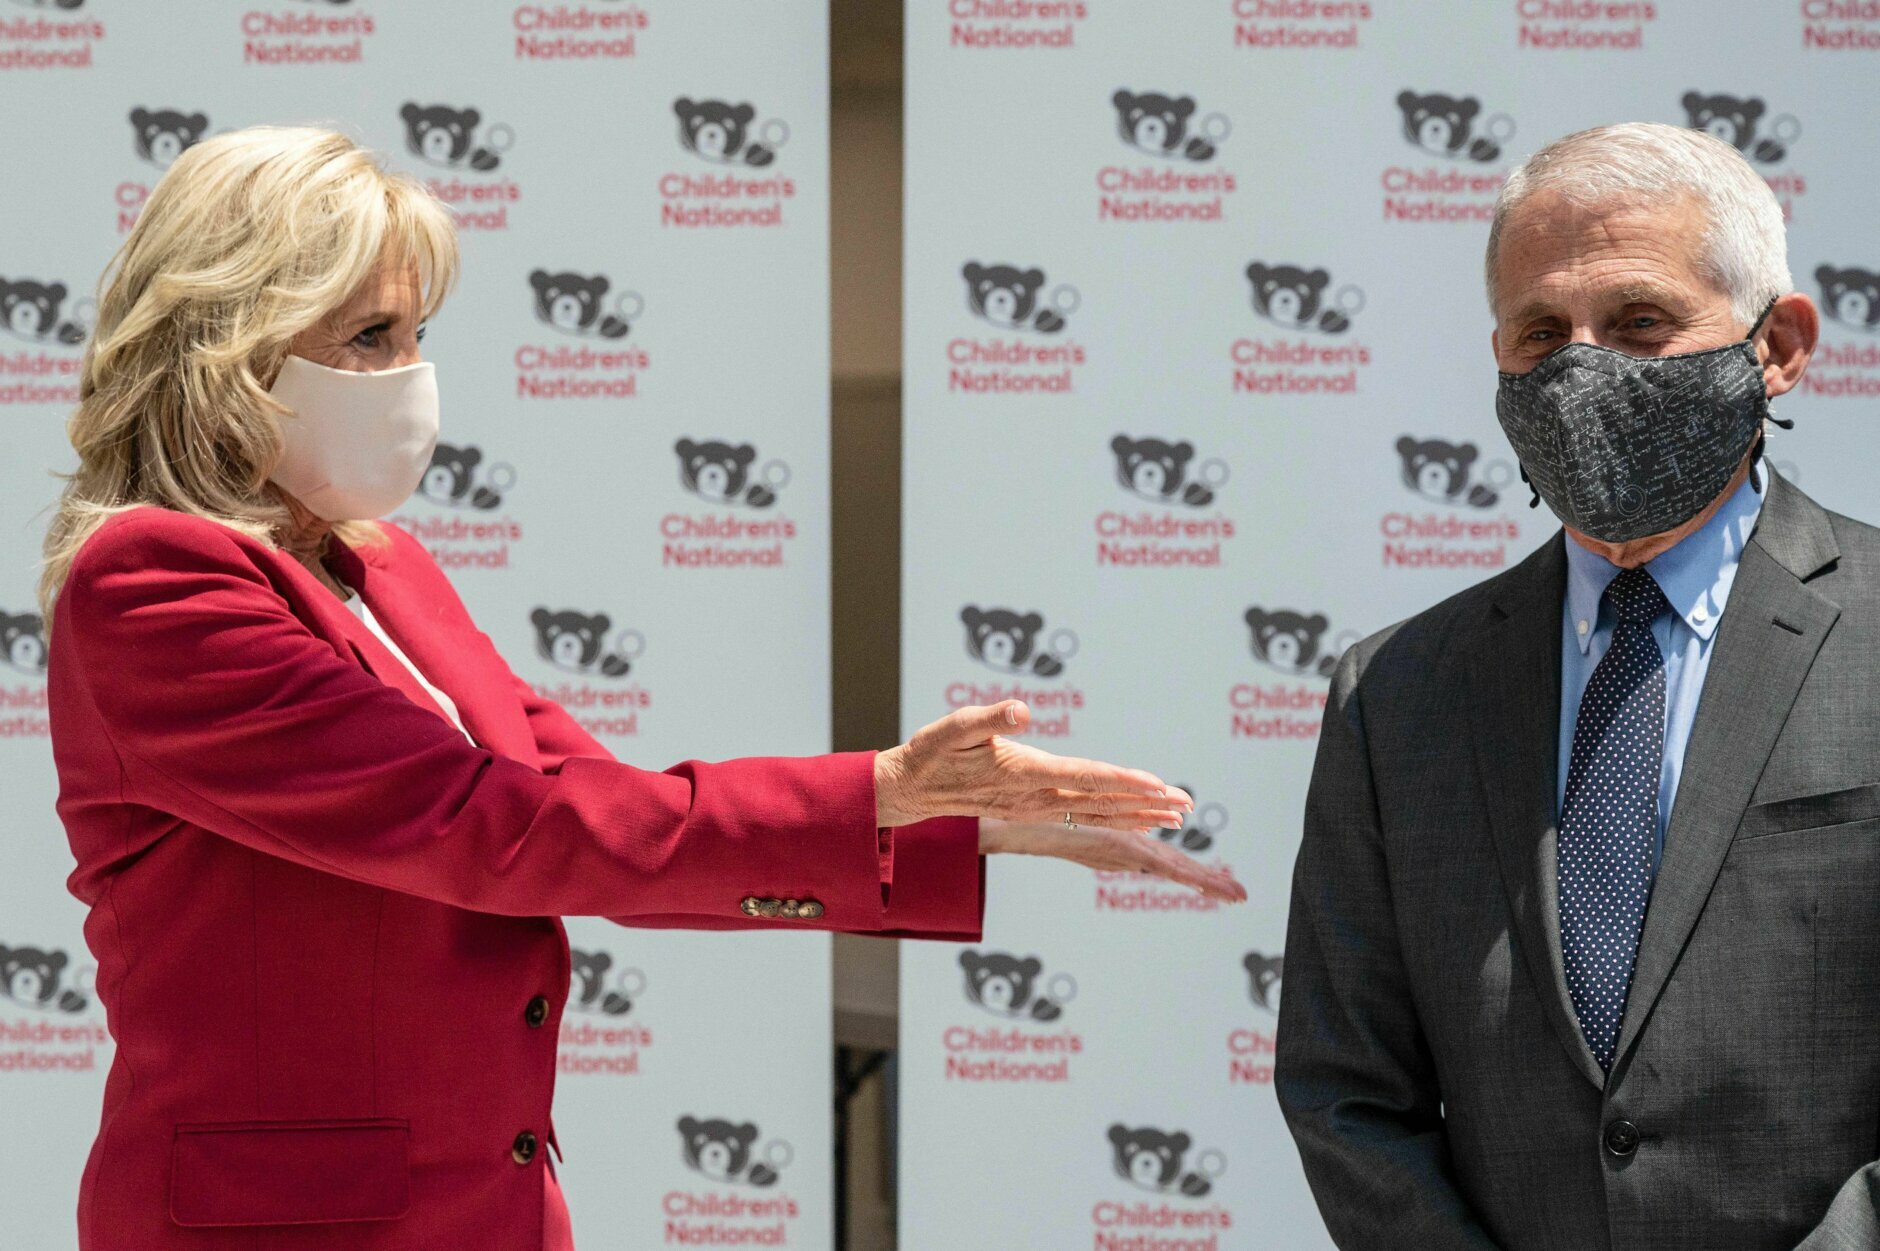 US First Lady Jill Biden and Dr. Anthony Fauci (R) tour the vaccination center at the Children's National Hospital in Washington, DC on May 20, 2021. (Photo by JIM WATSON / AFP) (Photo by JIM WATSON/AFP via Getty Images)